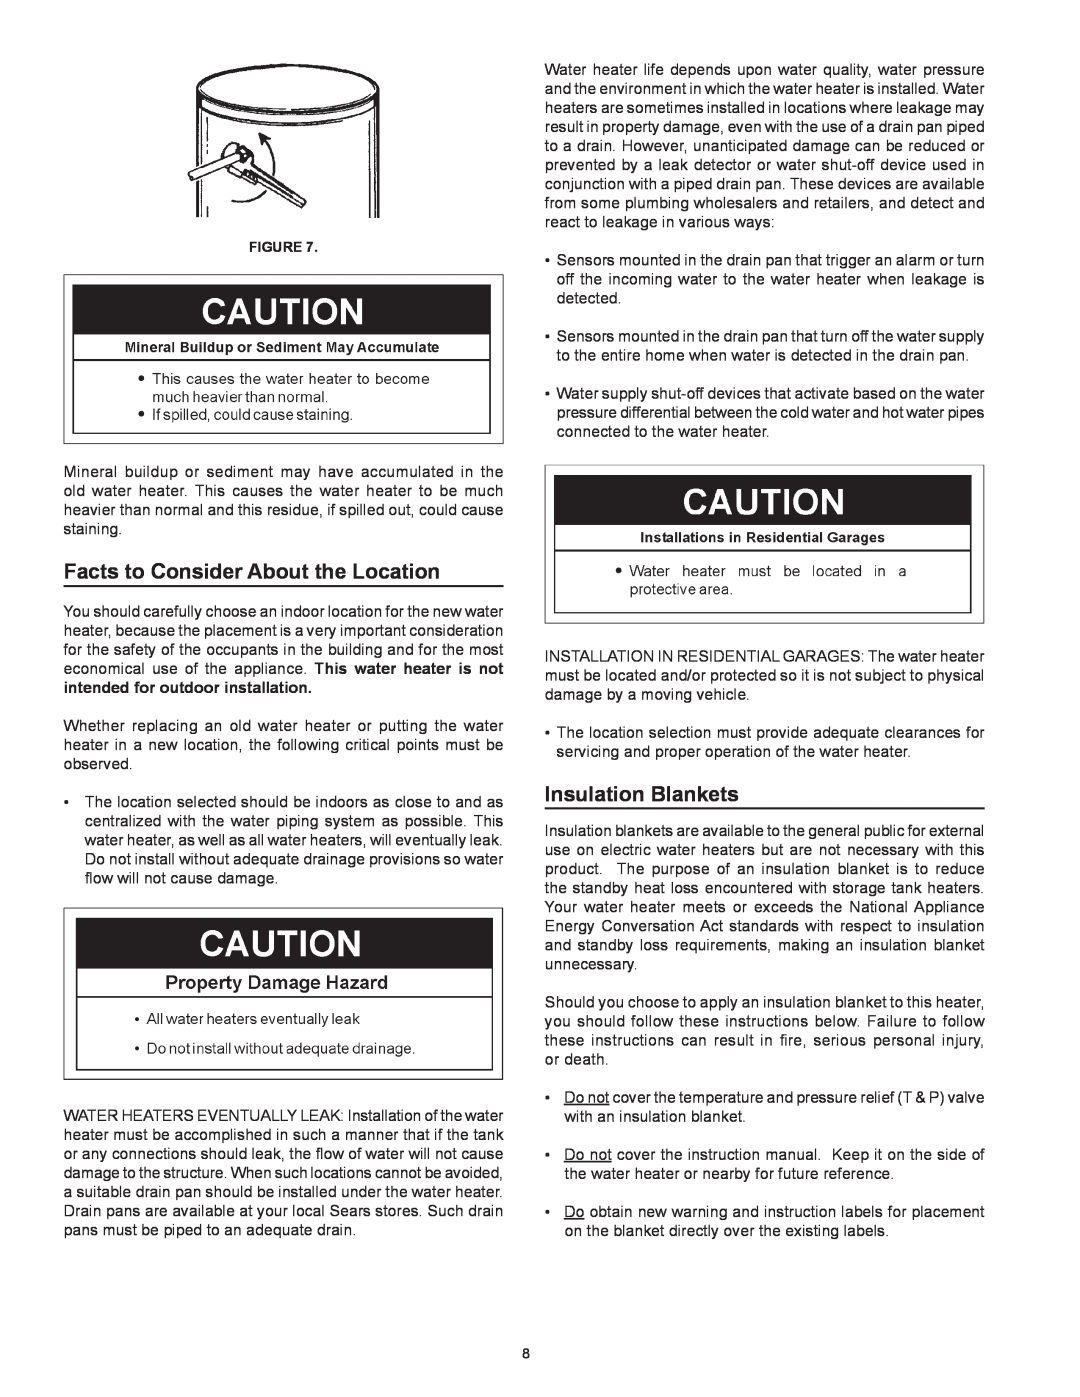 Kenmore 153.31604 owner manual Facts to Consider About the Location, Insulation Blankets 